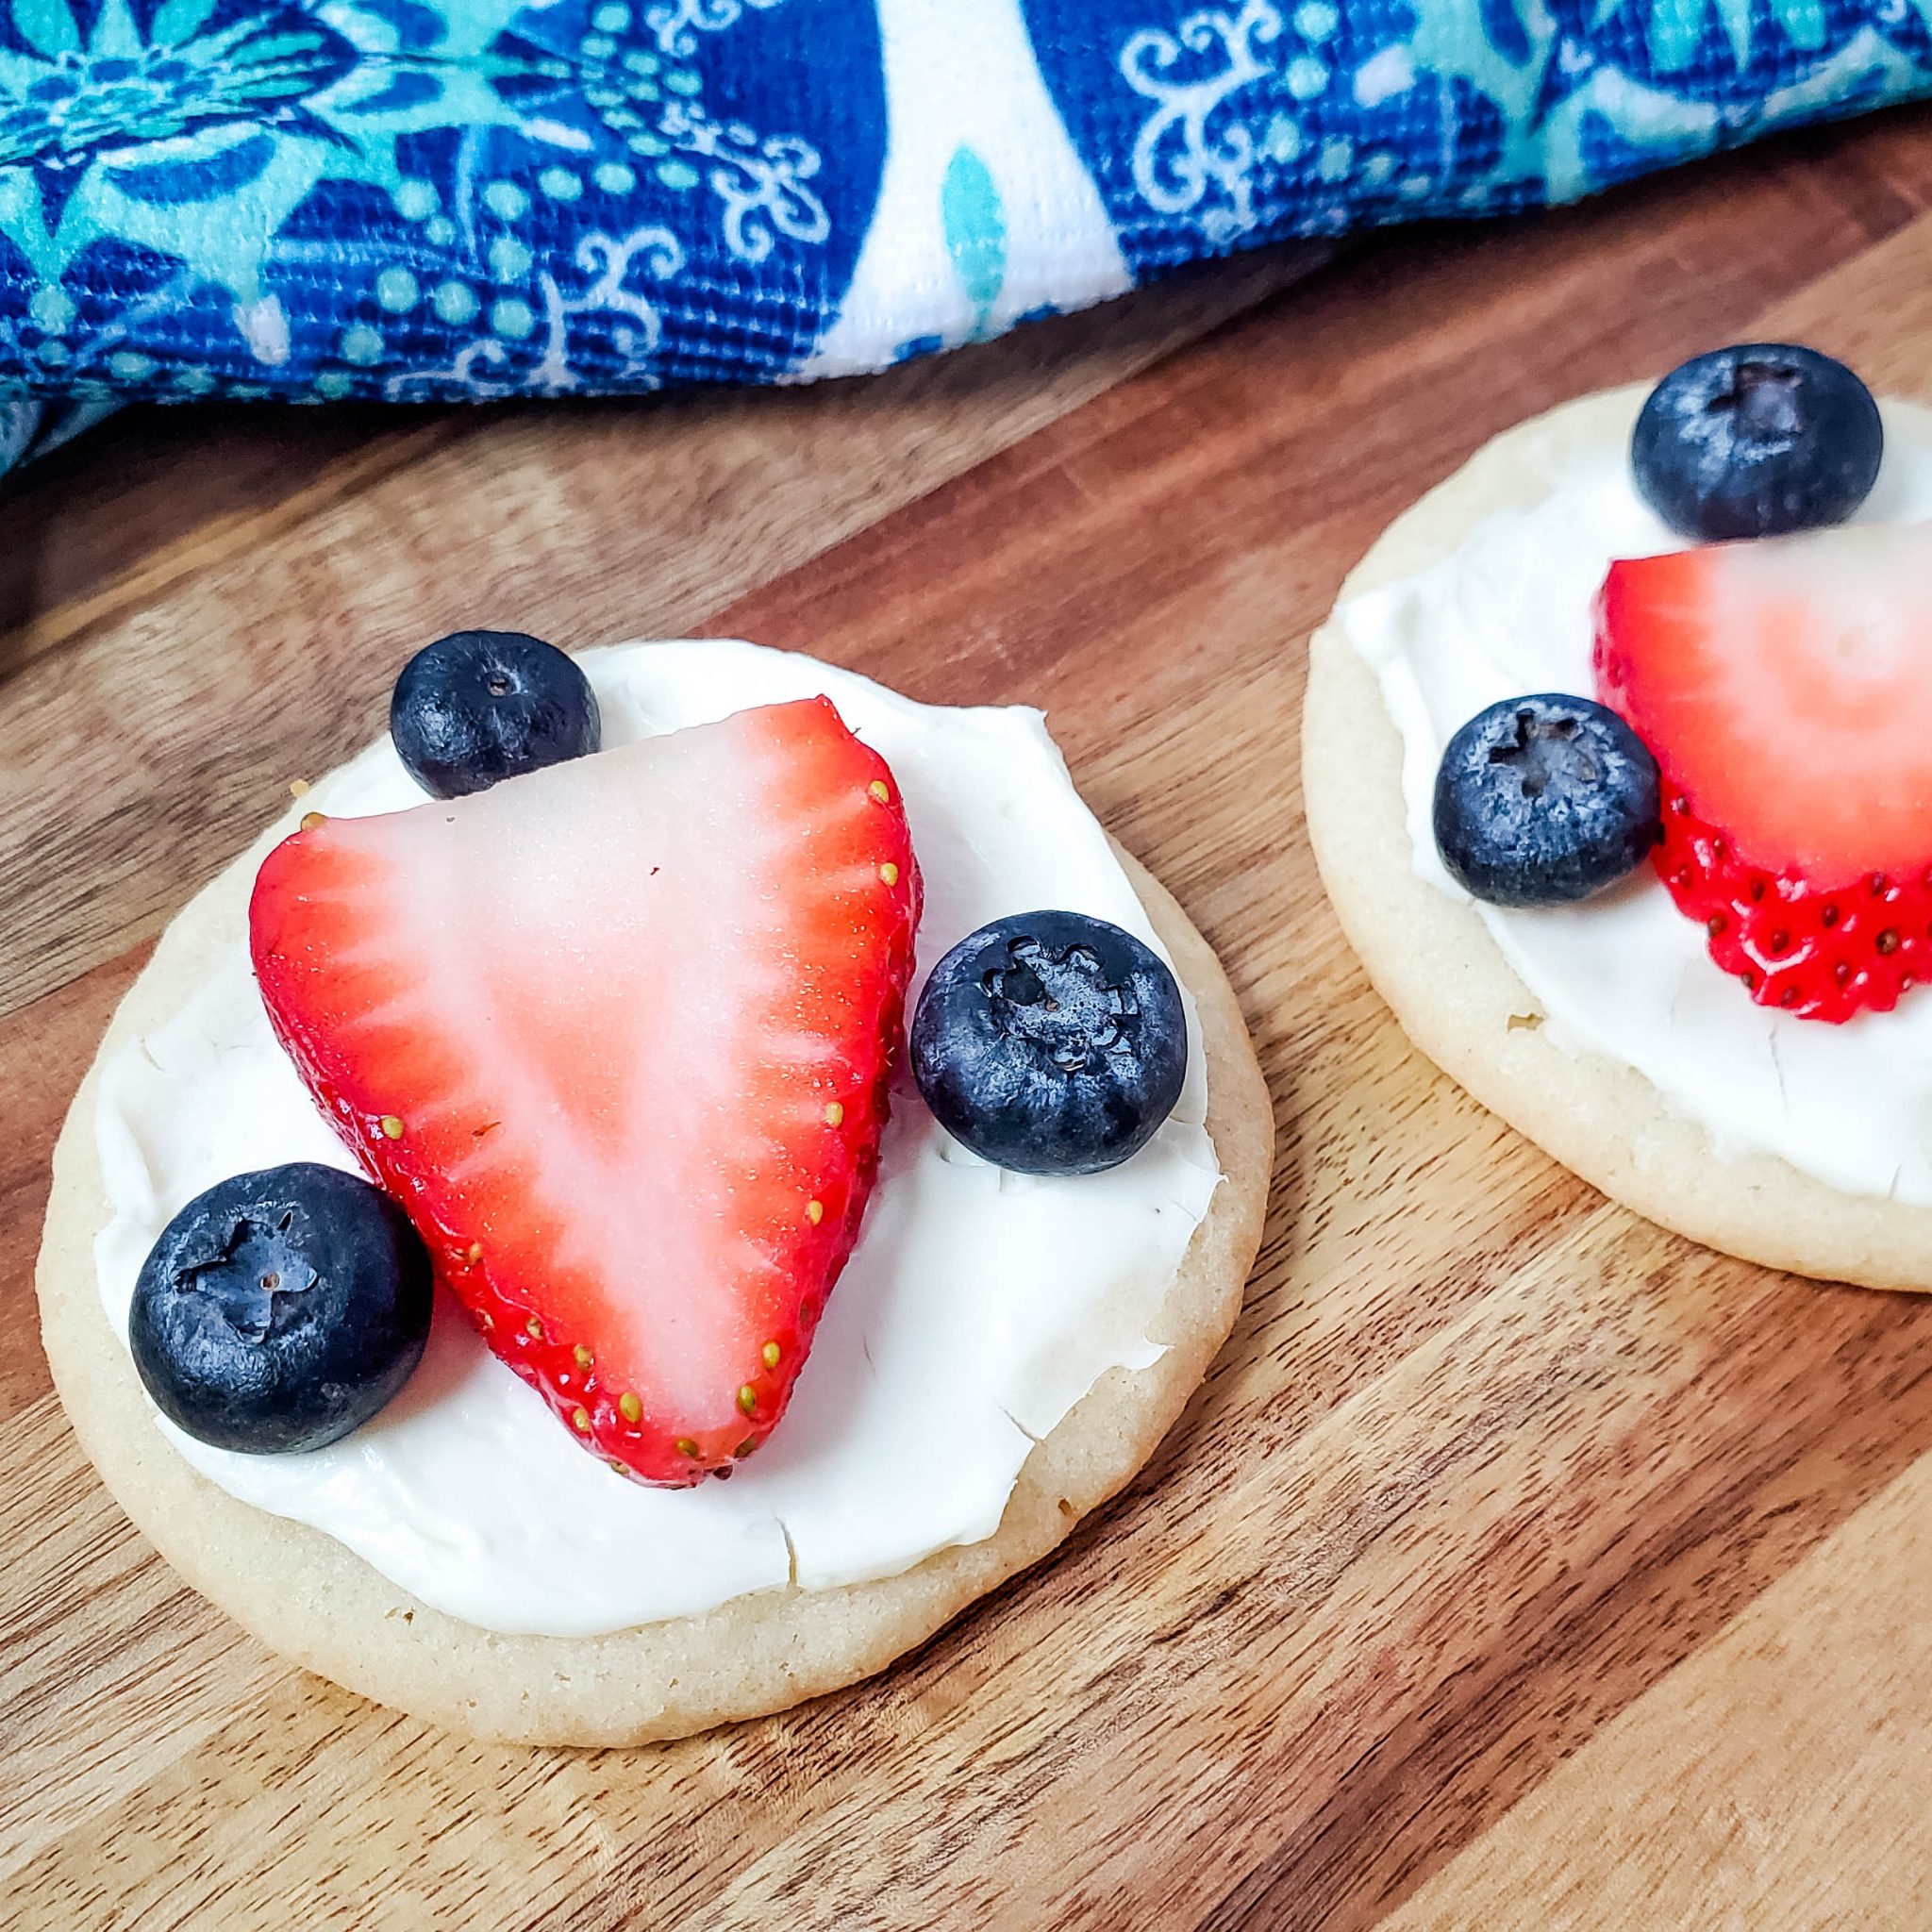 Sugar cookie with cream cheese frosting decorated with a strawberry and three blueberries